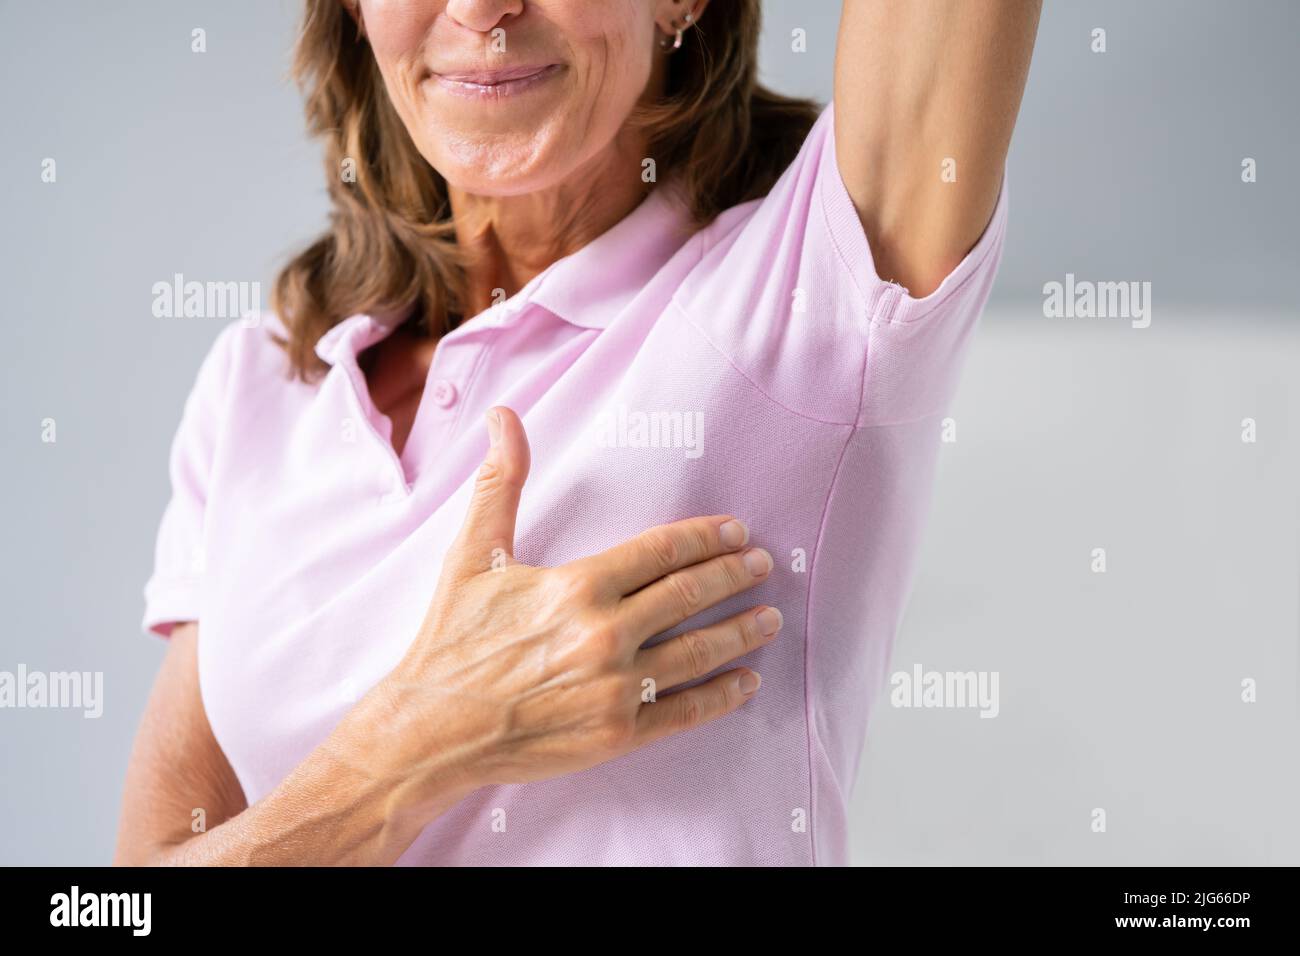 Woman With Hyperhidrosis Sweating Very Badly Under Armpit Stock Photo